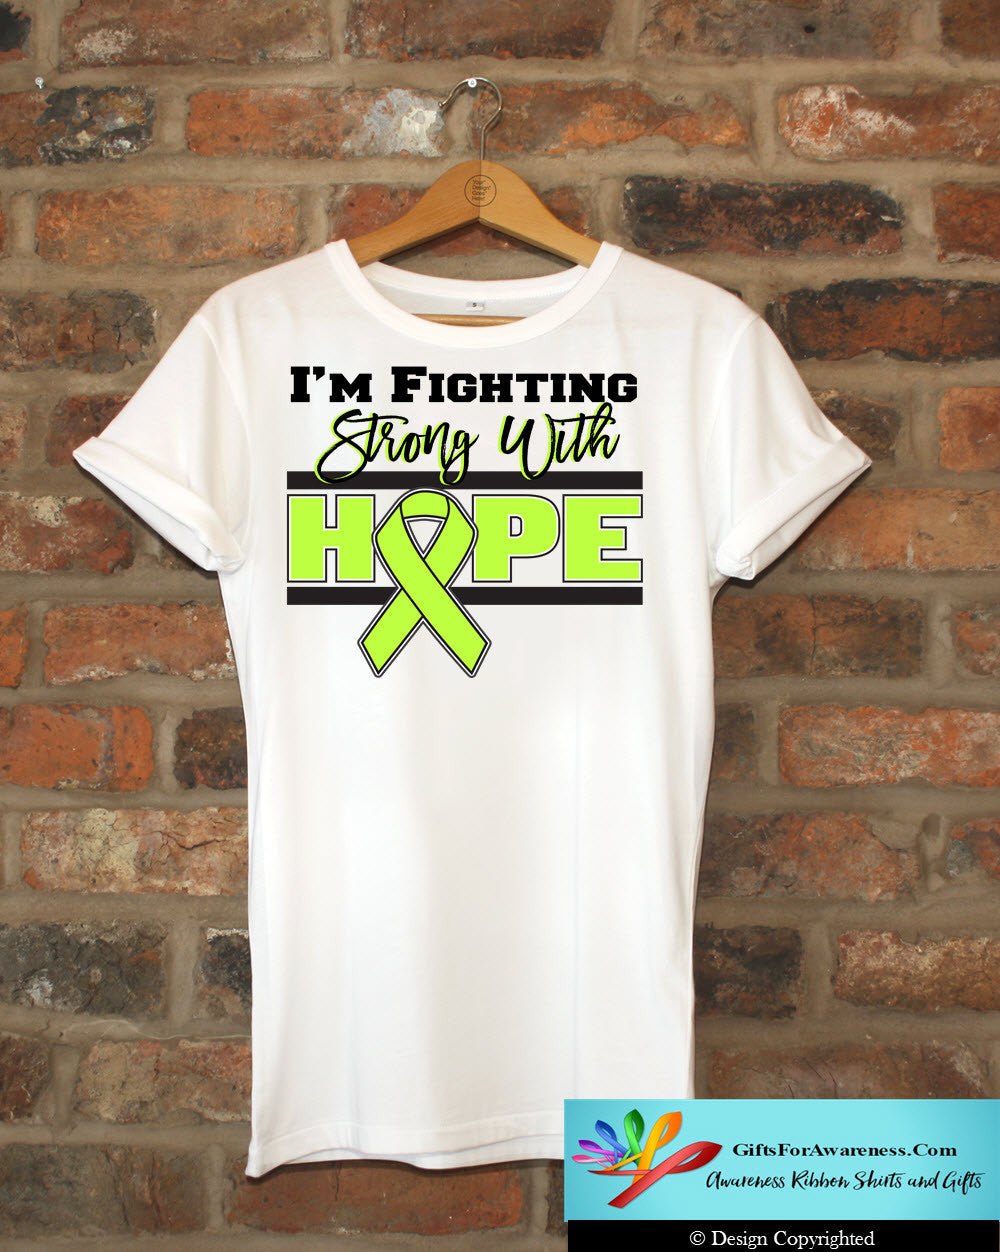 Lymphoma I'm Fighting Strong With Hope Shirts - GiftsForAwareness